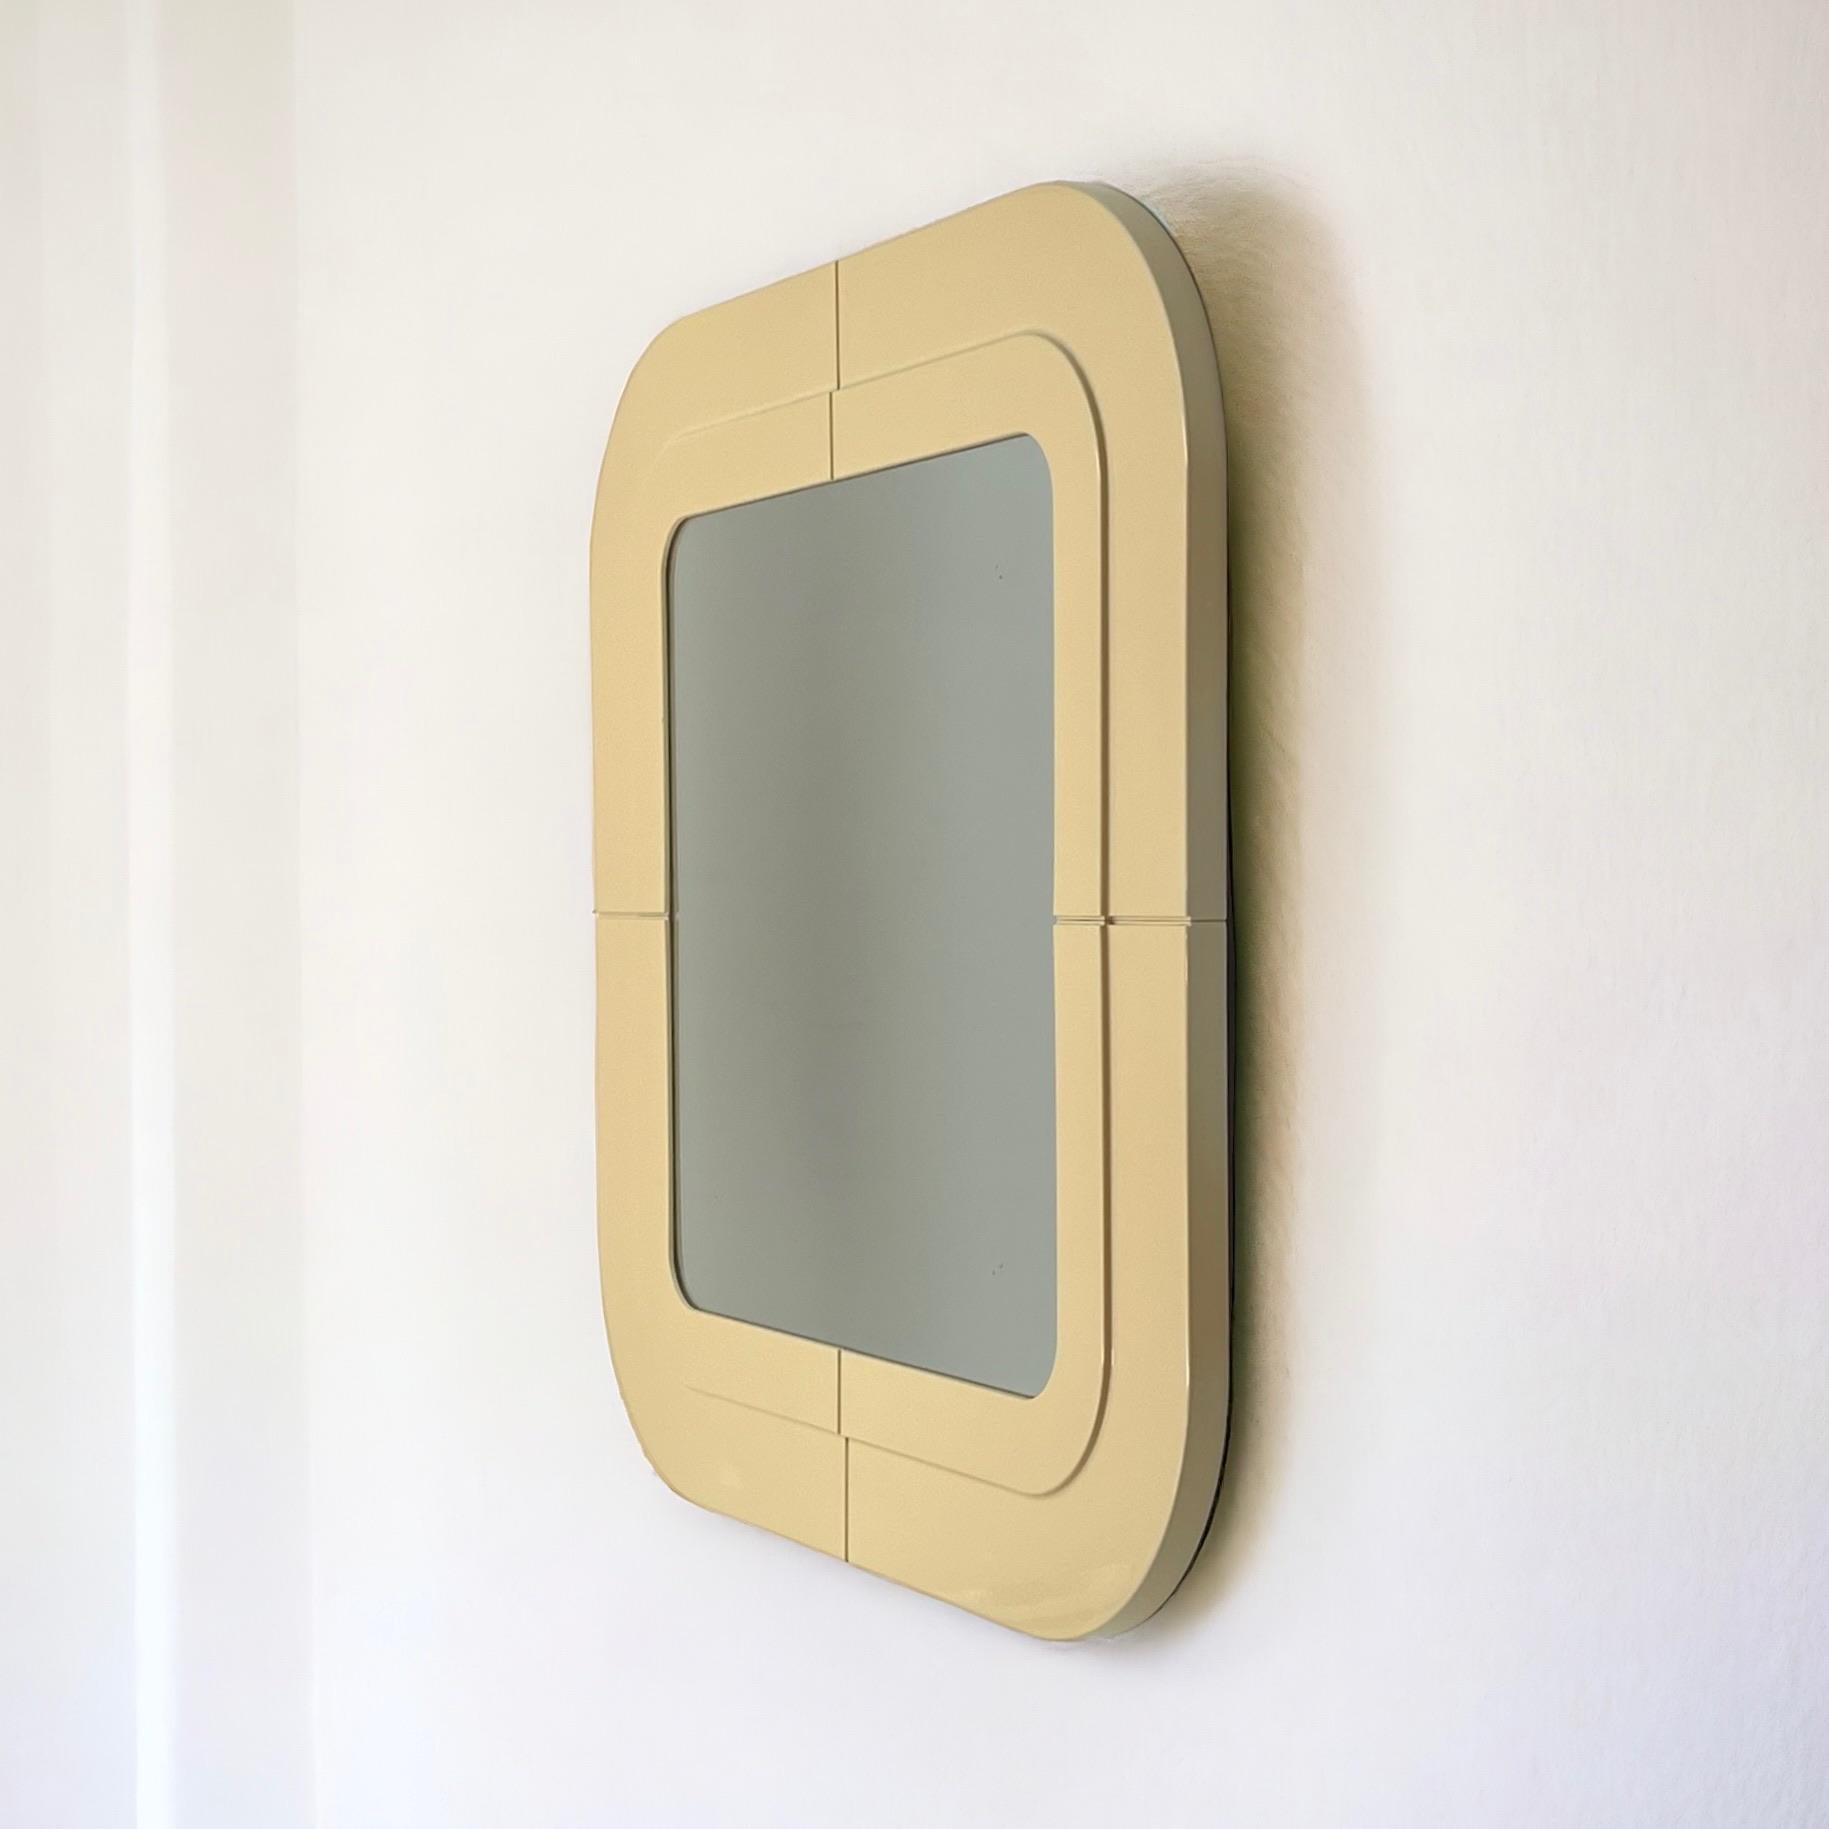 Mid-20th Century Vintage Wall Mirror by Anna Castelli Ferrieri for Kartell - 1960s For Sale